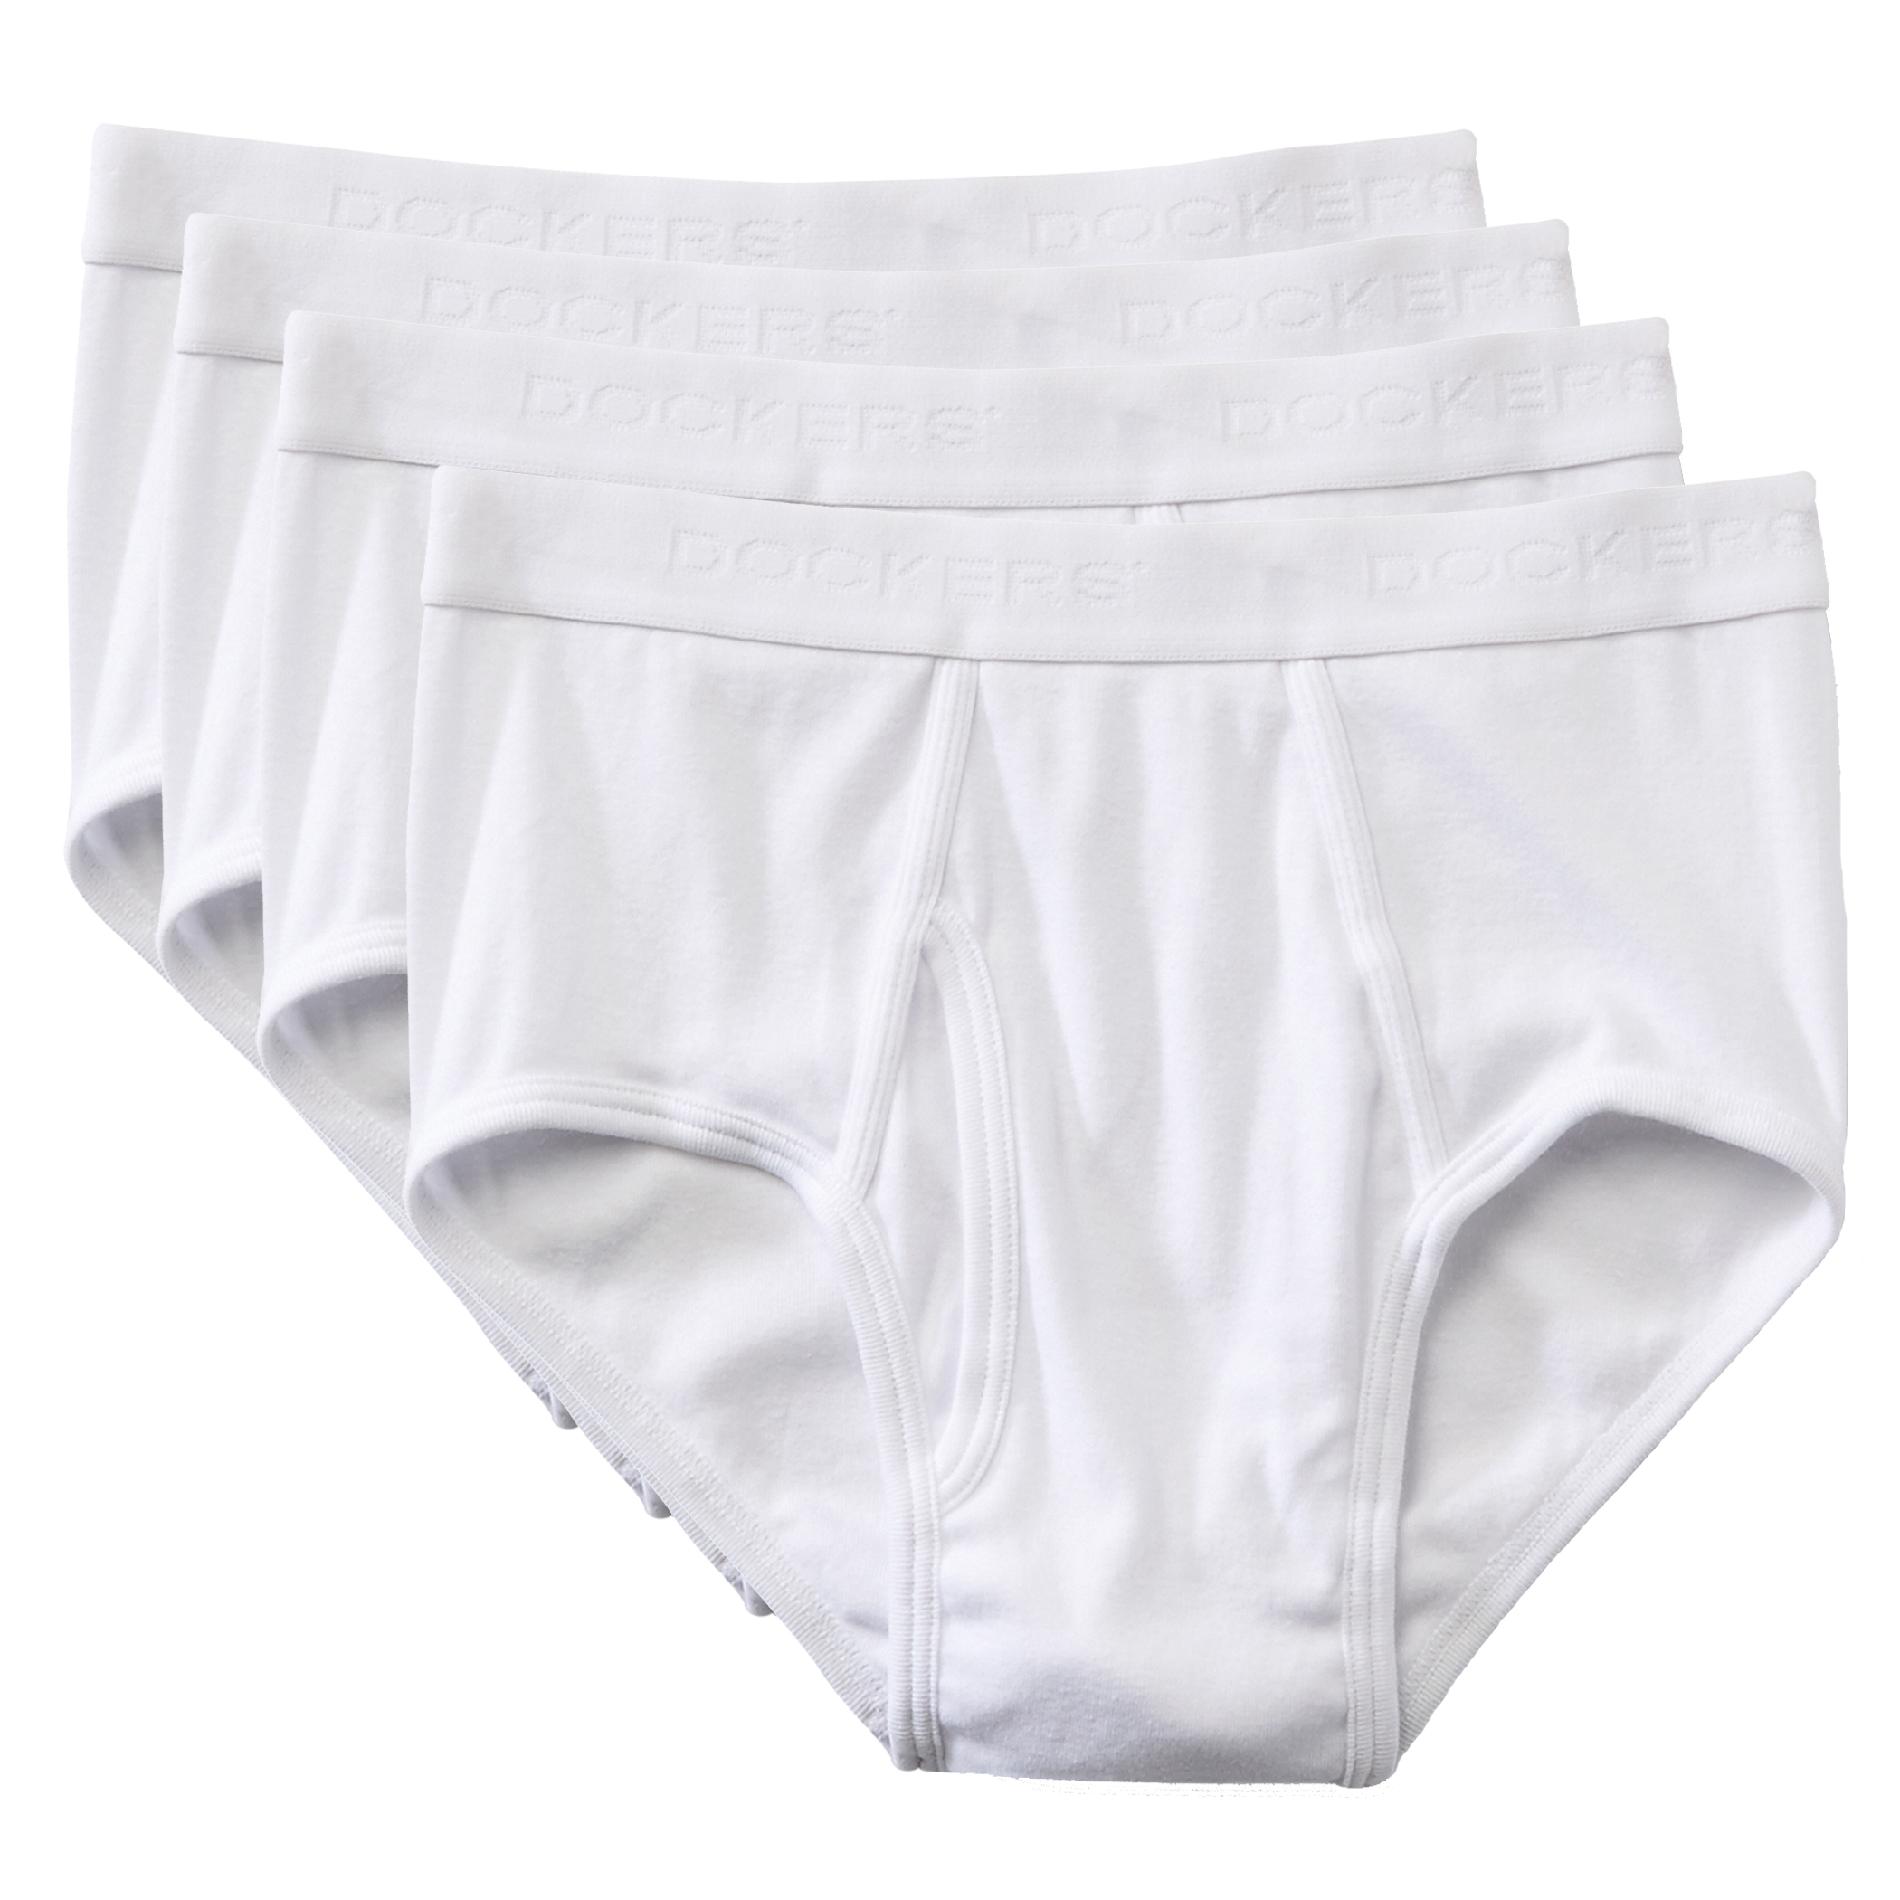 Dockers White Classic Briefs (4 pack)